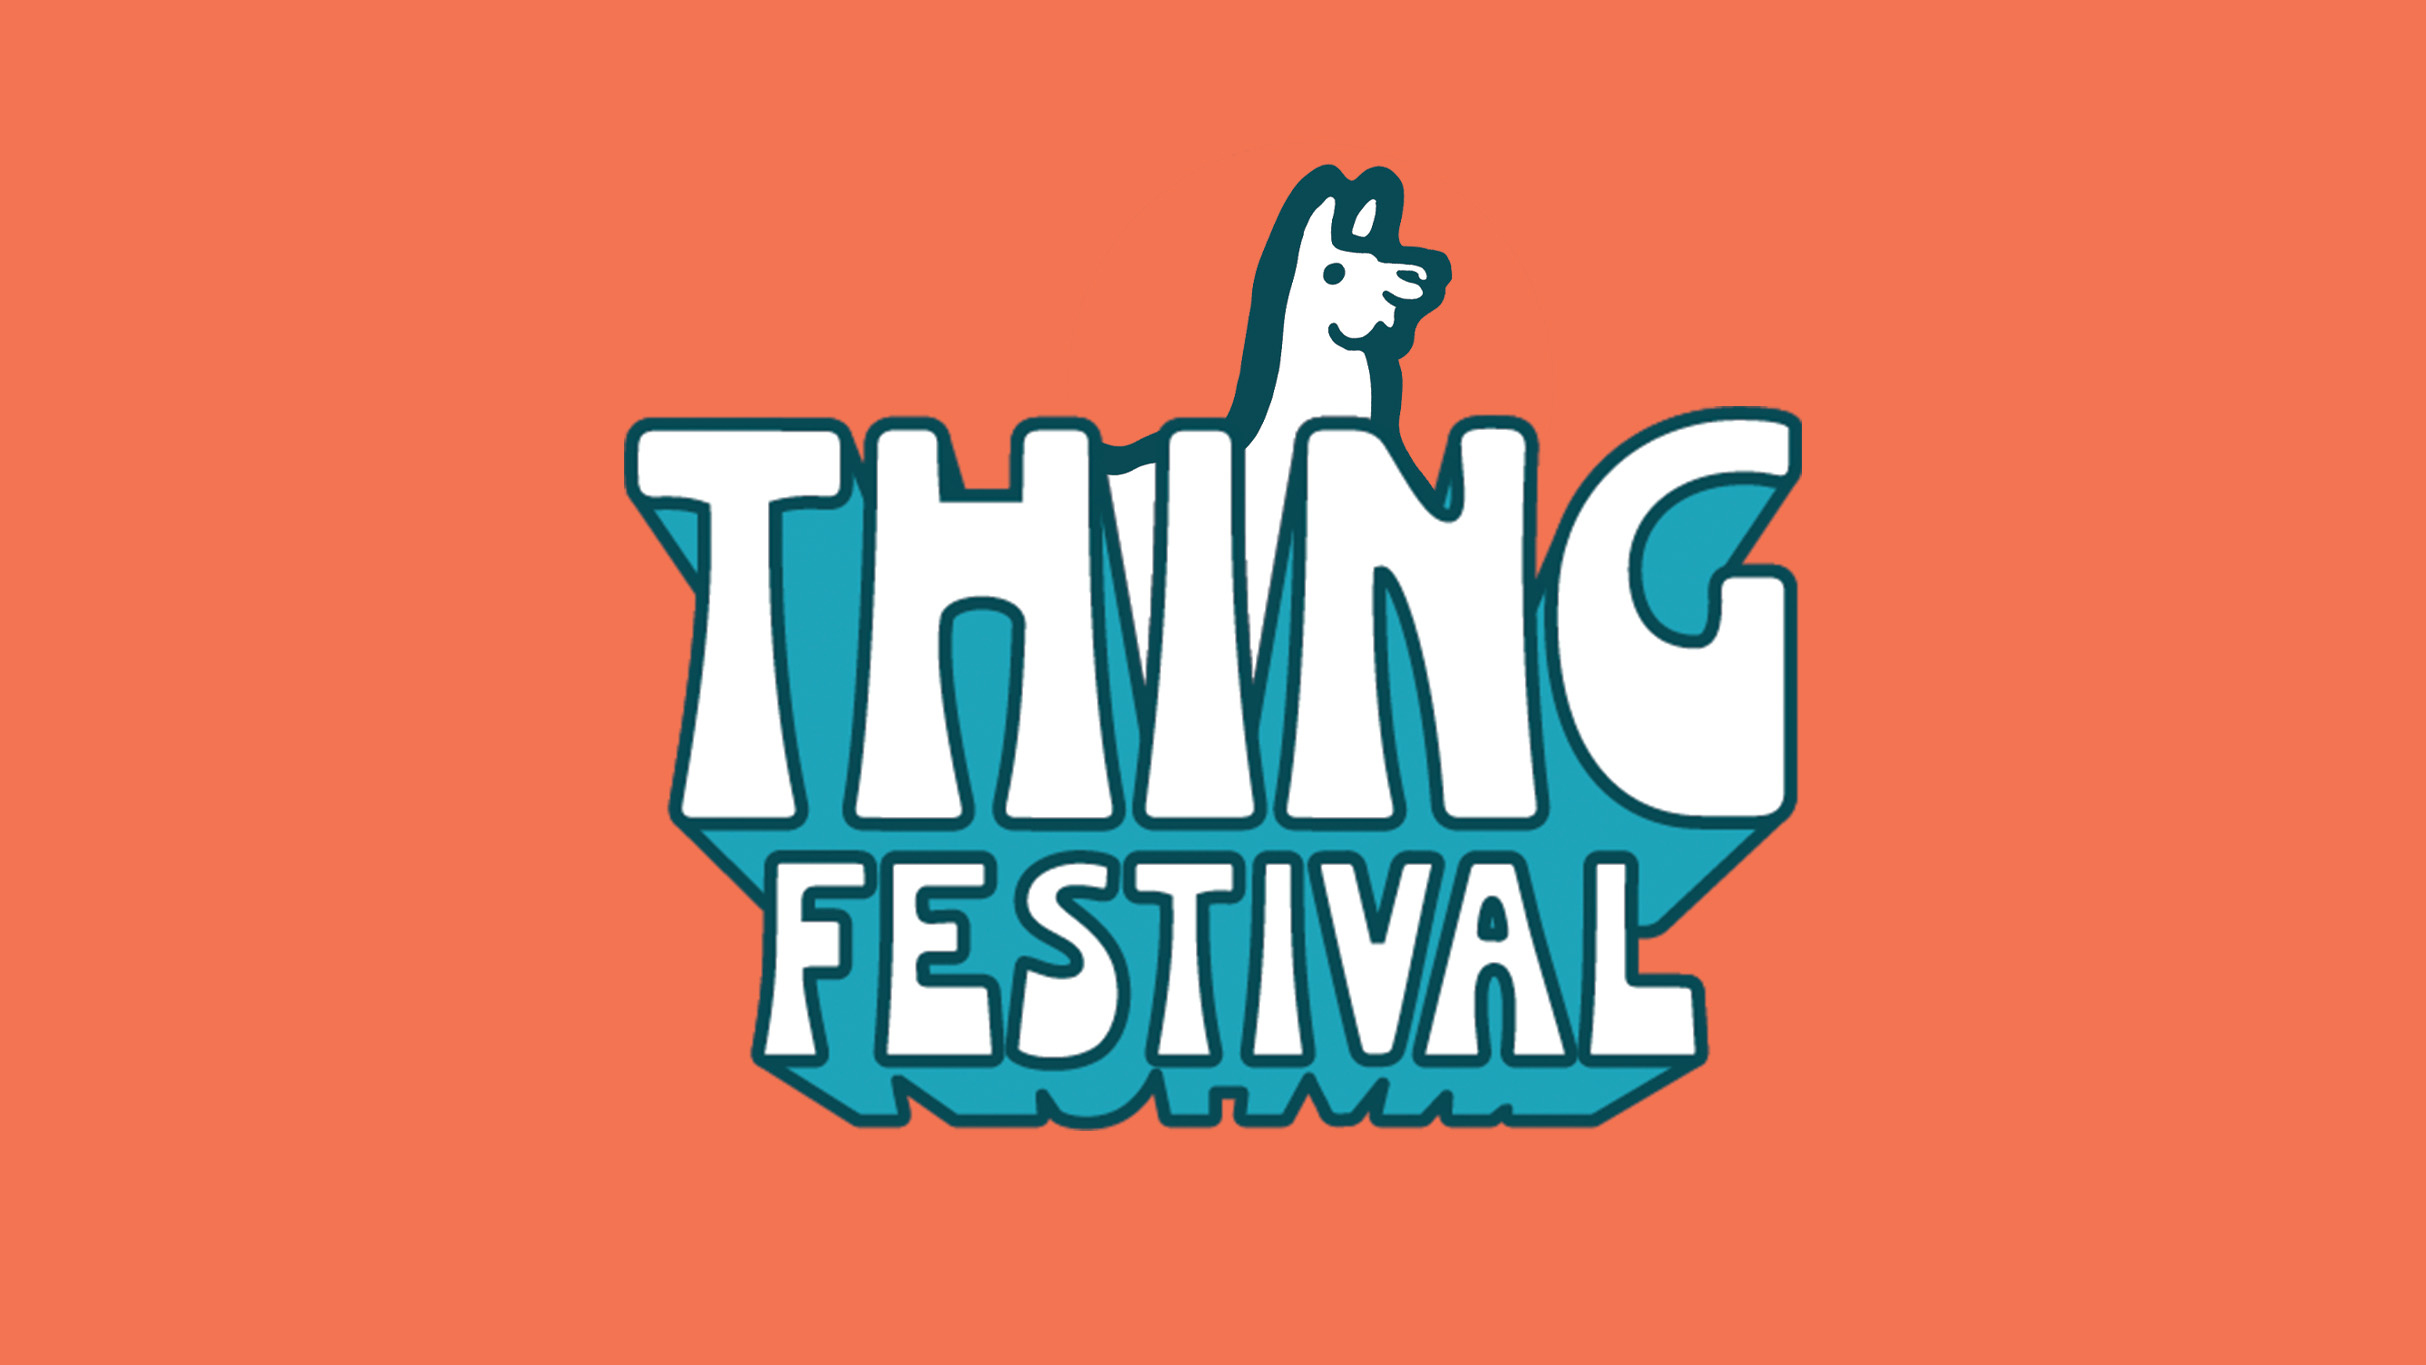 THING Festival 3-Day Pass!